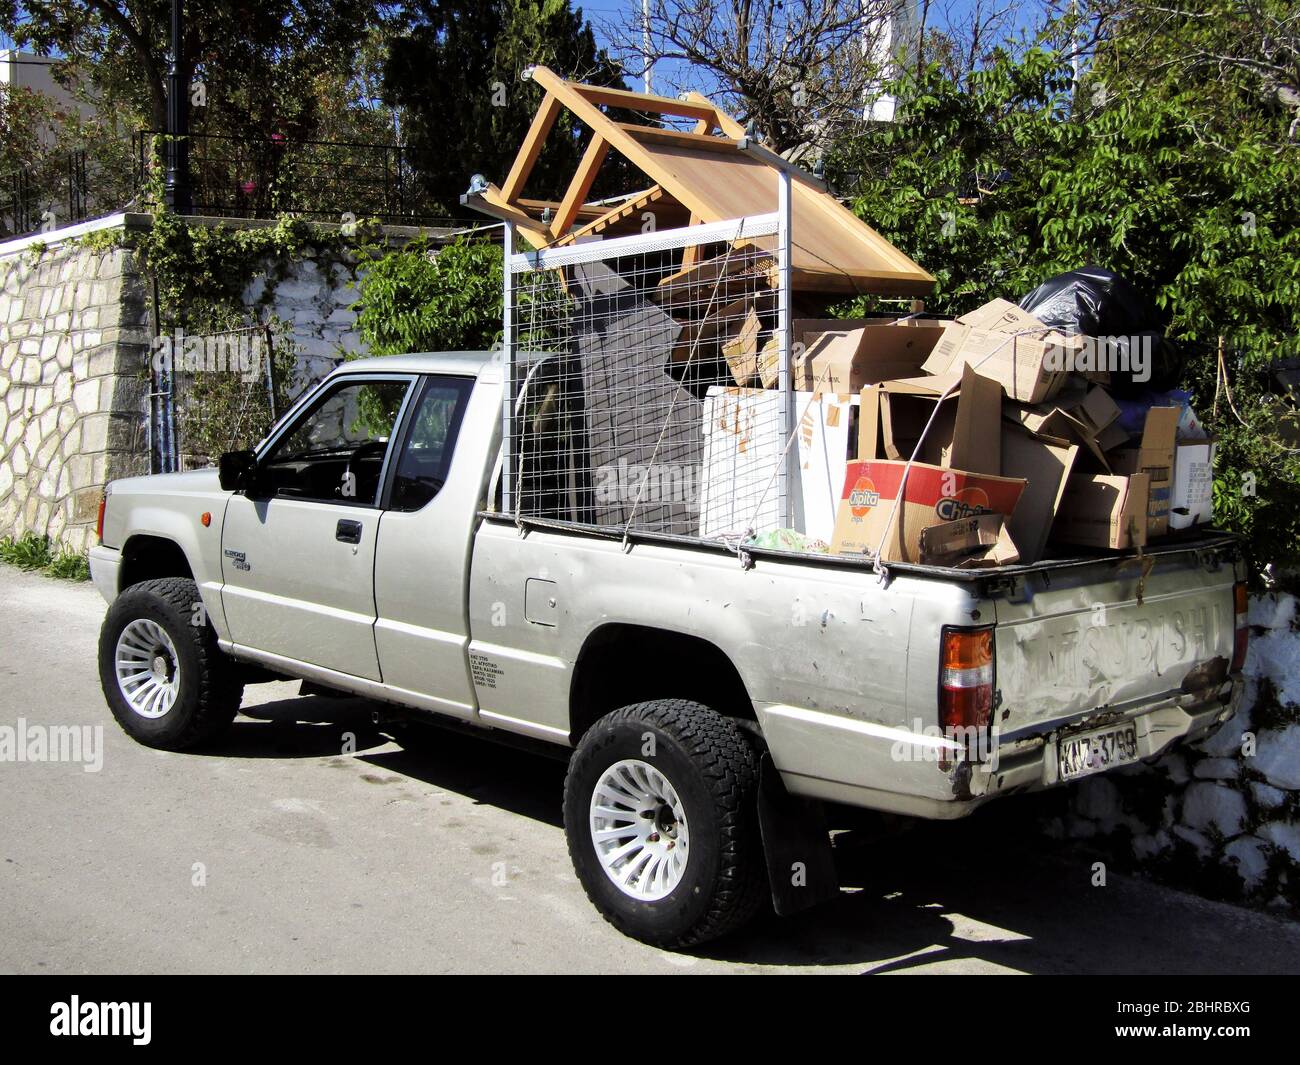 Fully loaded Pickup Truck with Rubbish, Galatas Village, Crete, Greece Stock Photo